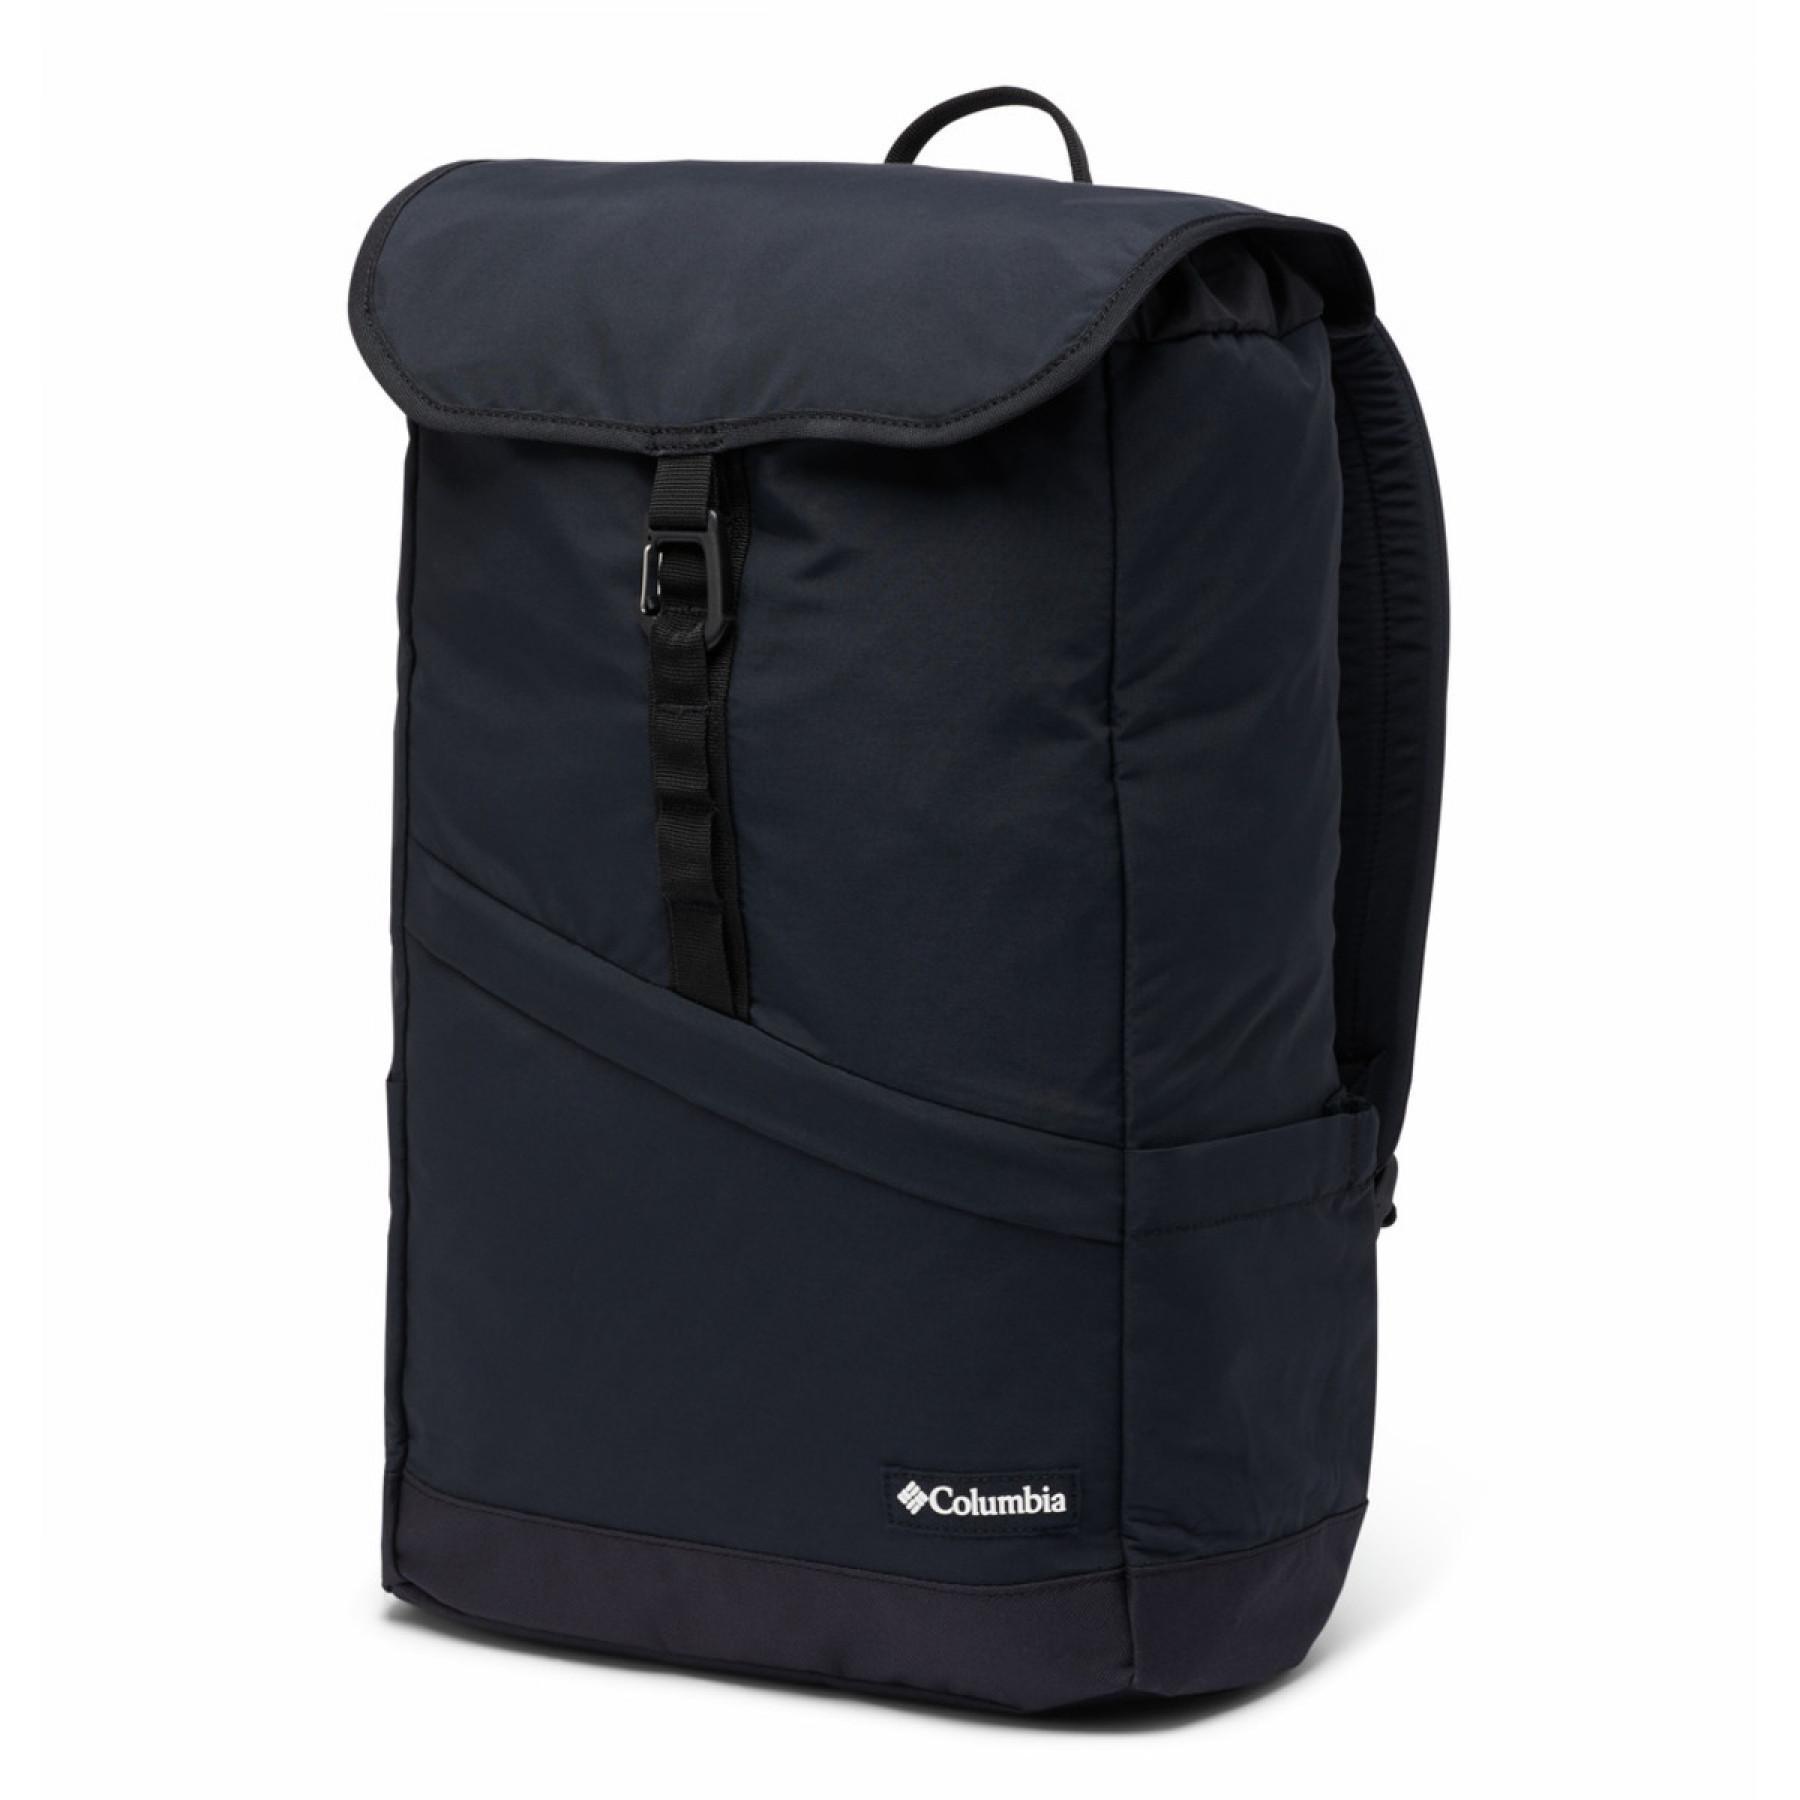 Backpack Columbia Falmouth 24L pr